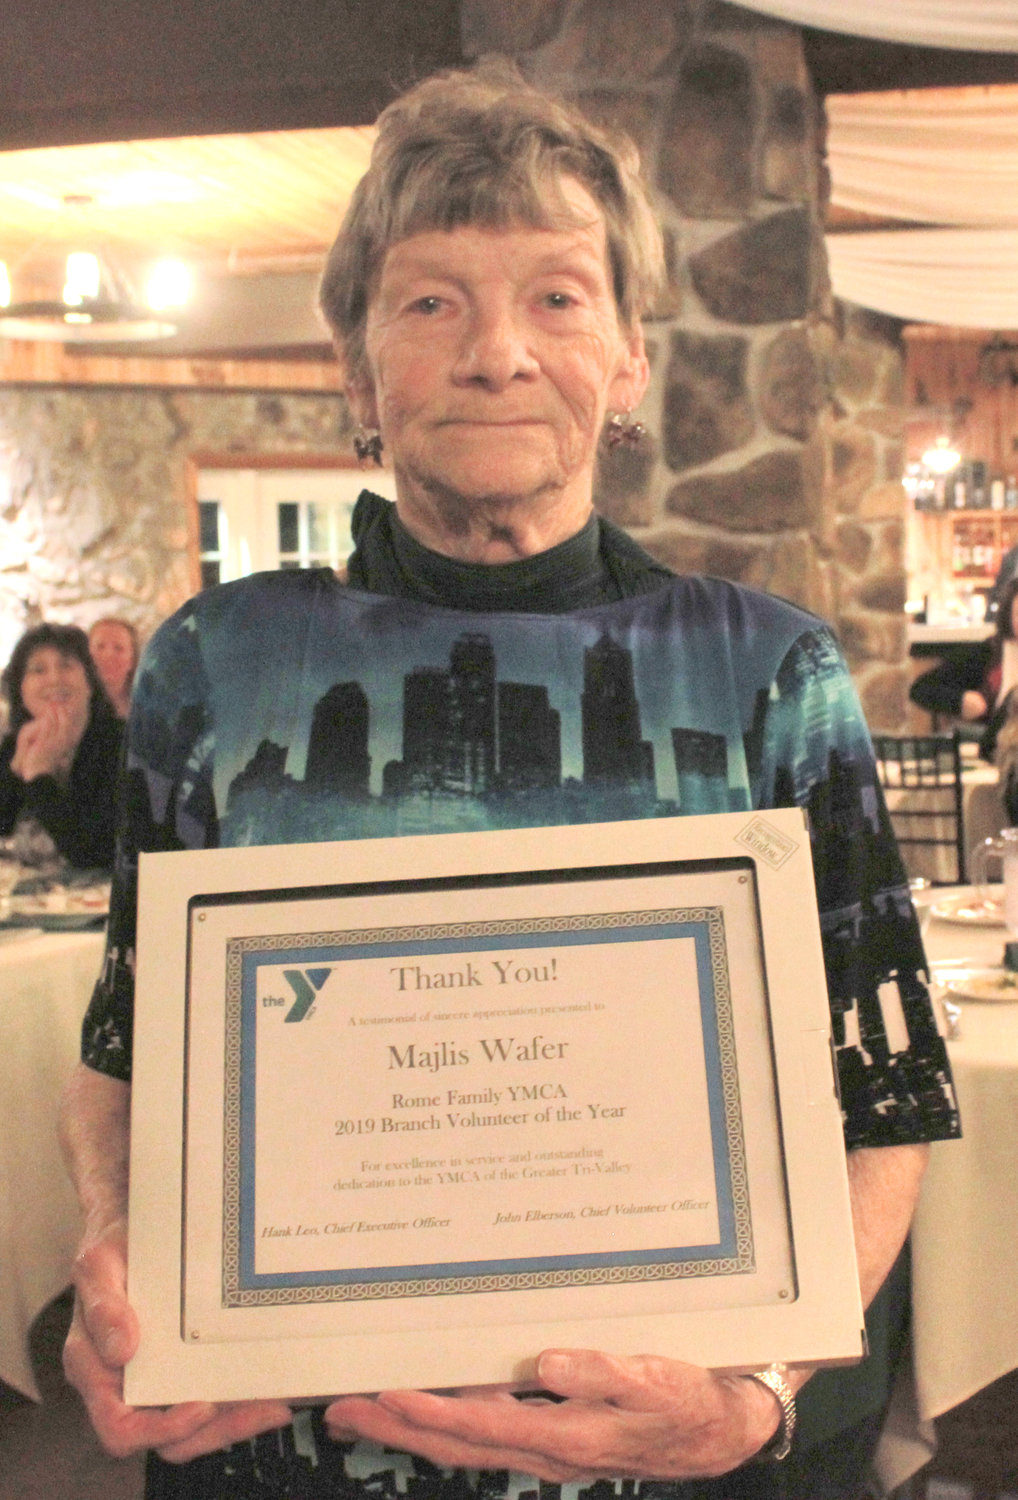 ROME VOLUNTEER — Majlis Wafer was awarded the Rome Volunteer of the Year at the annual YMCA 2020 Recognition Program on Wednesday.